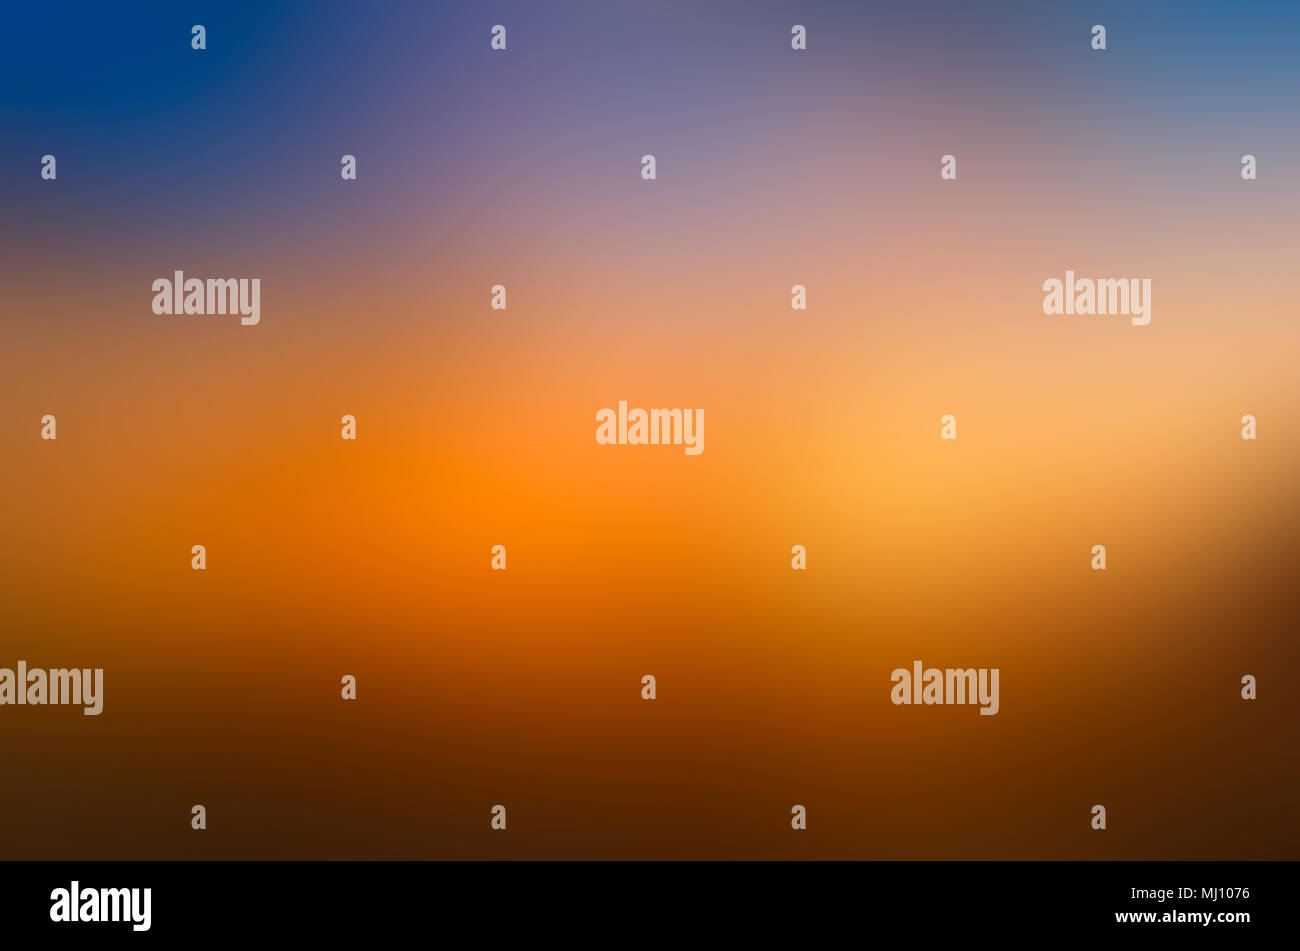 blur colorful Orange background purple yellow blue green color Primary colors Color Theory Stock Photo